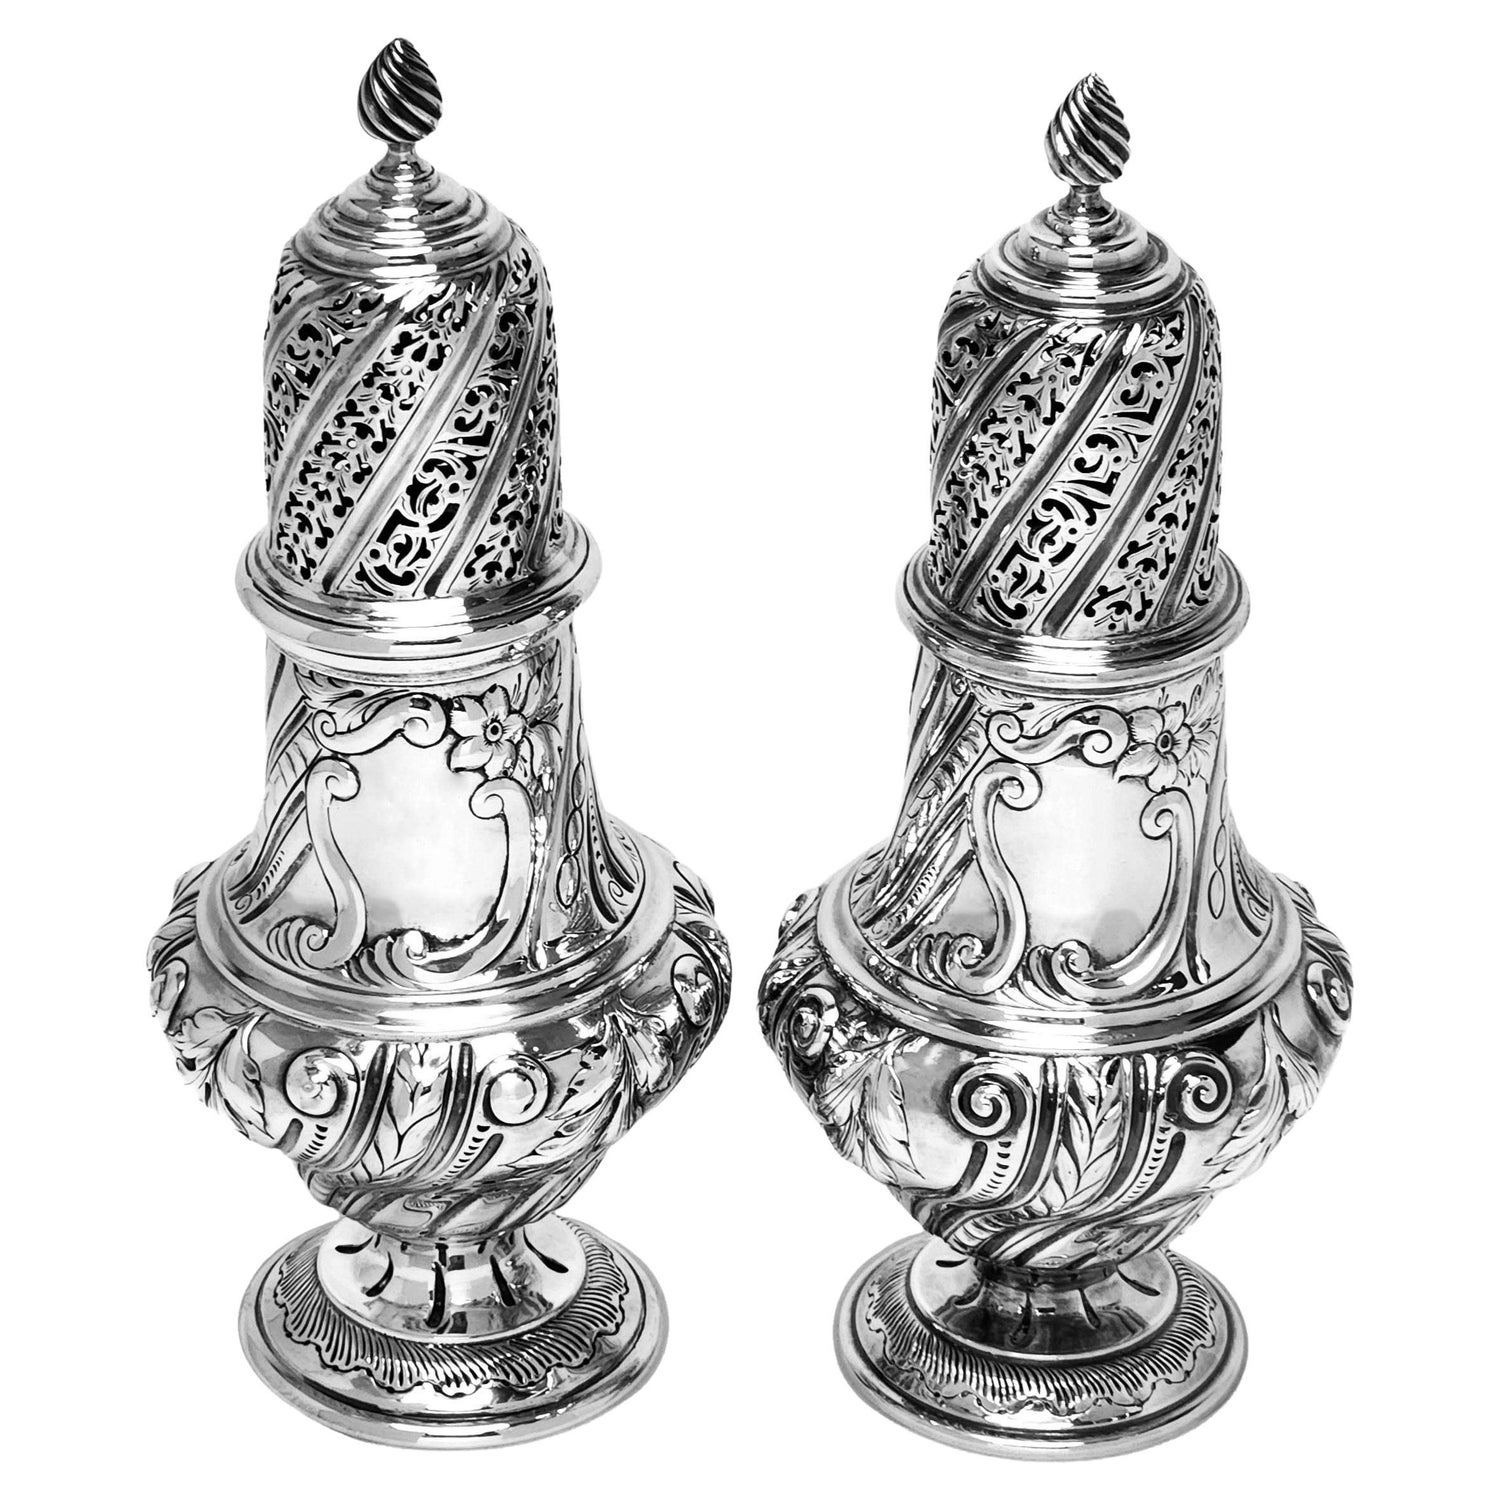 Pair Large Antique Victorian Silver Casters / Shakers 1886 / 87 Sugar